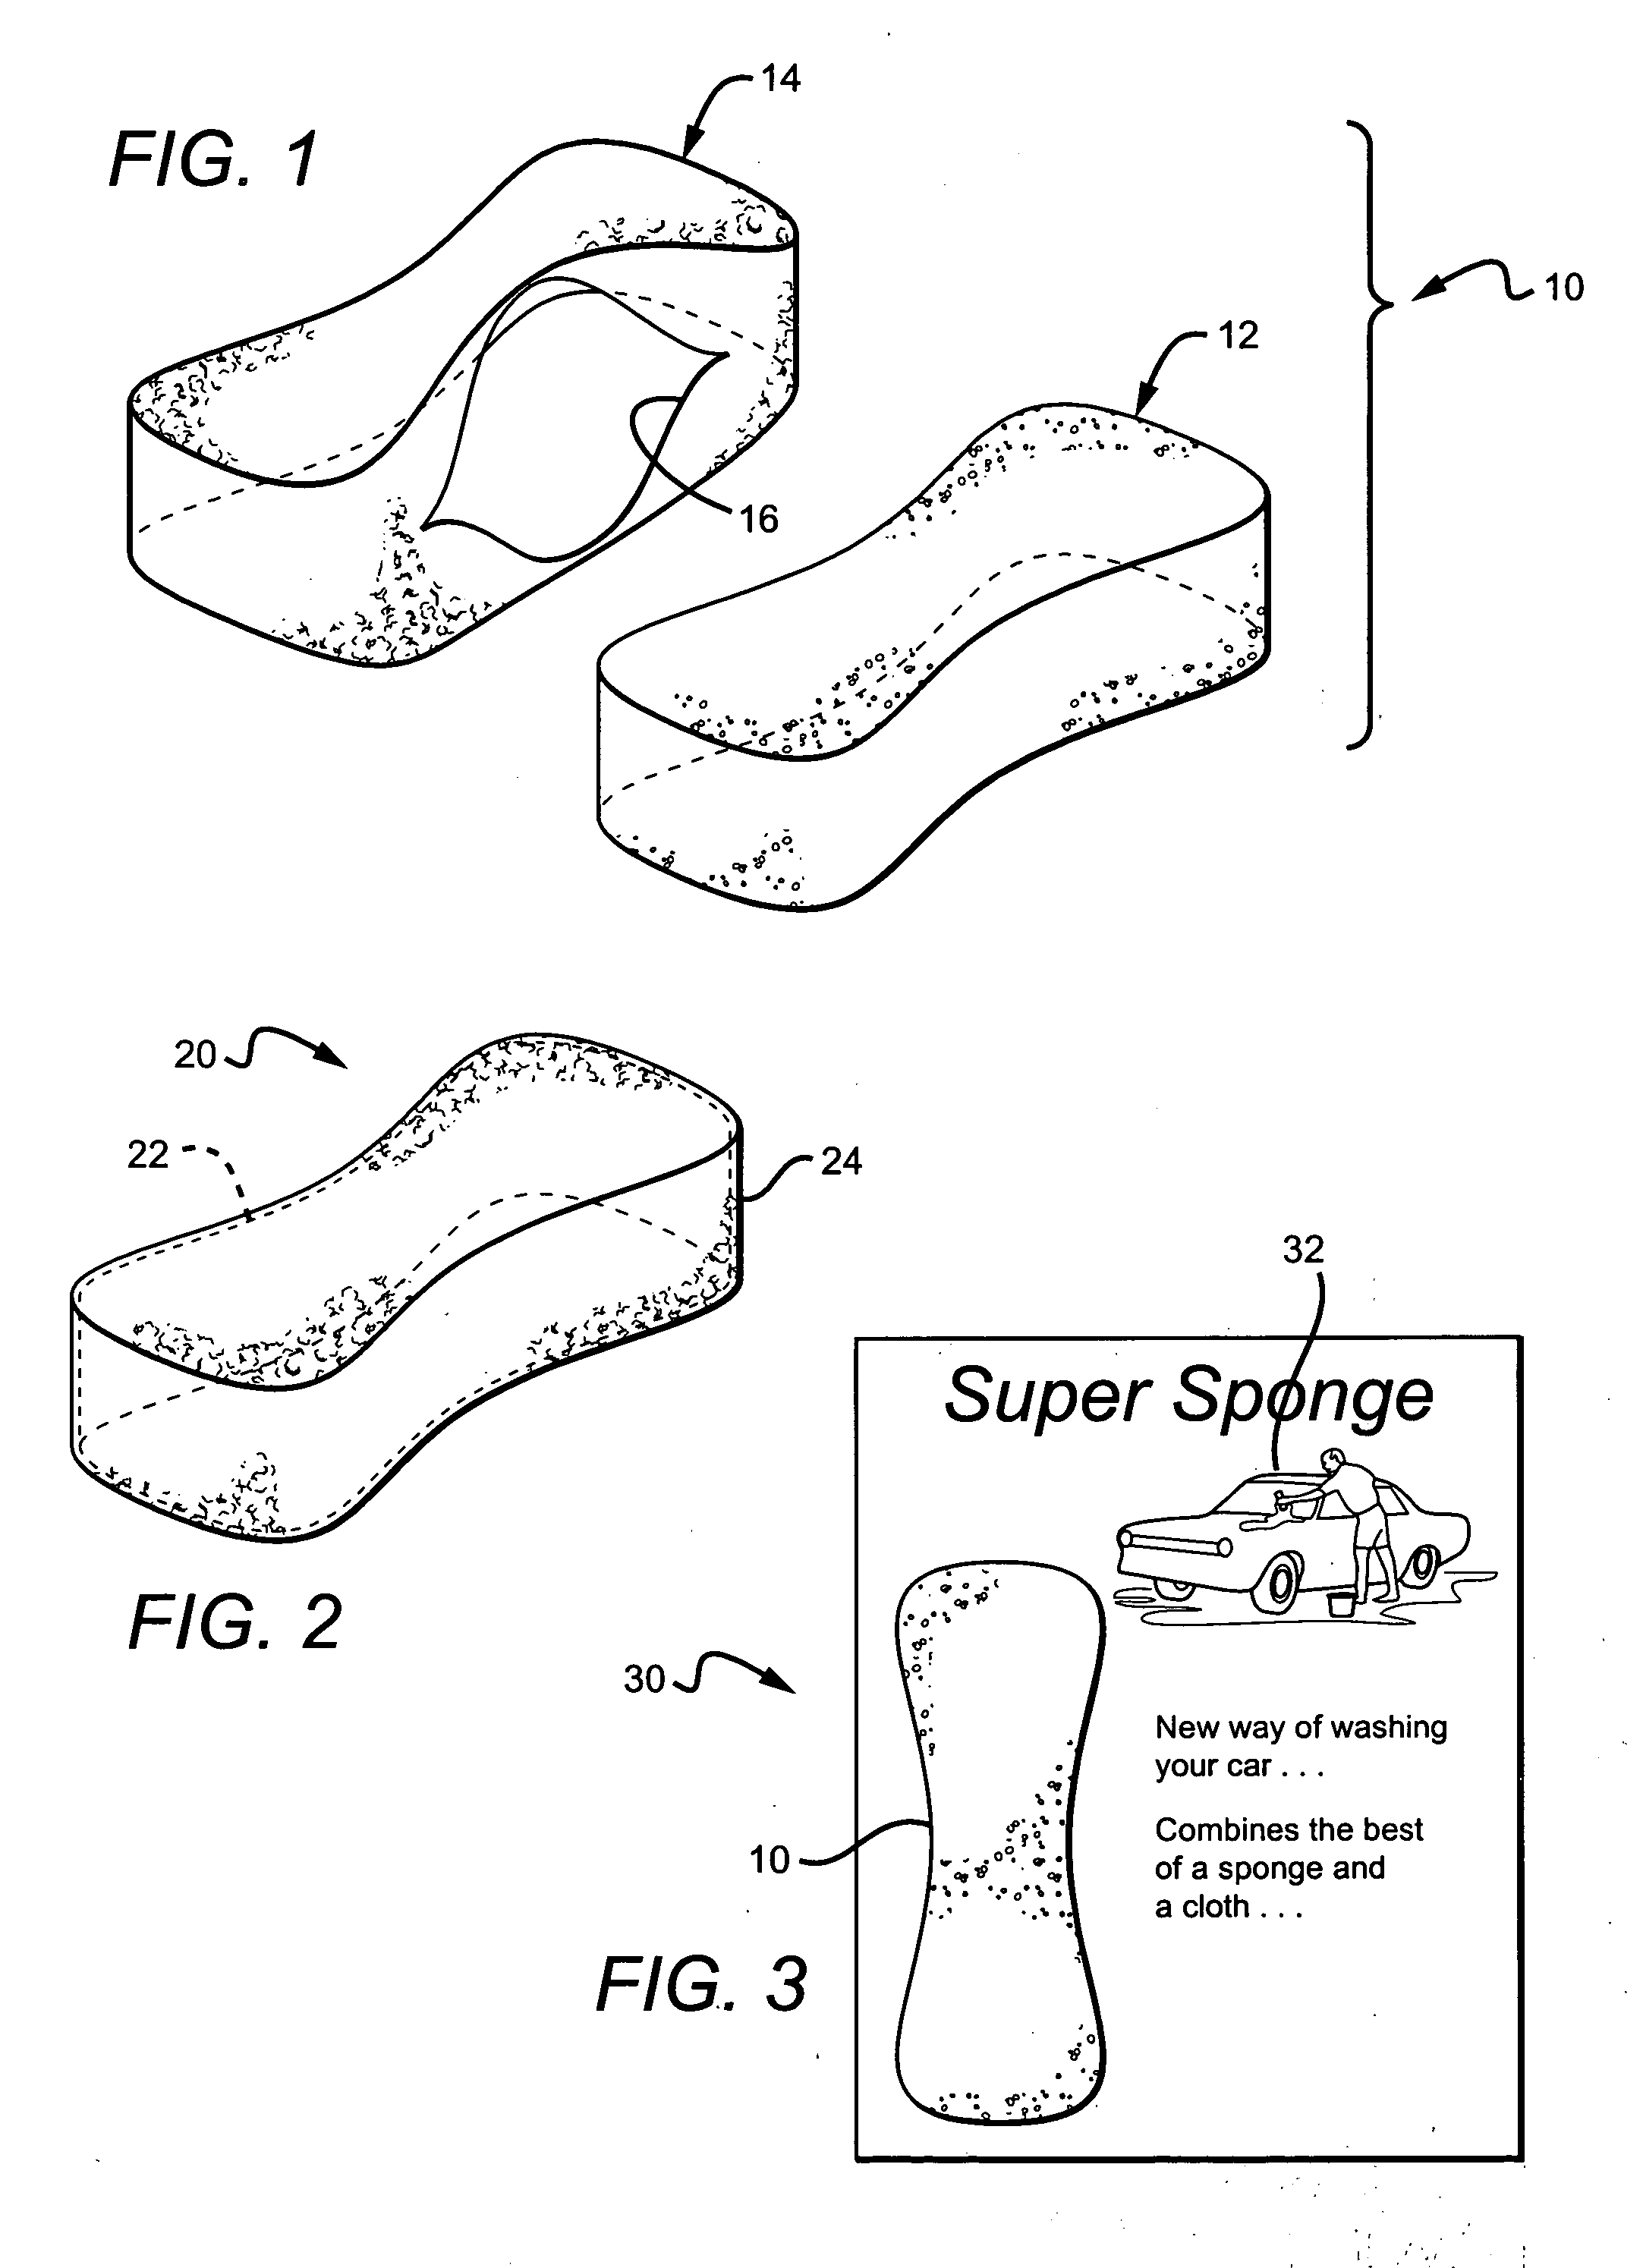 Sponge and cloth cleaning device